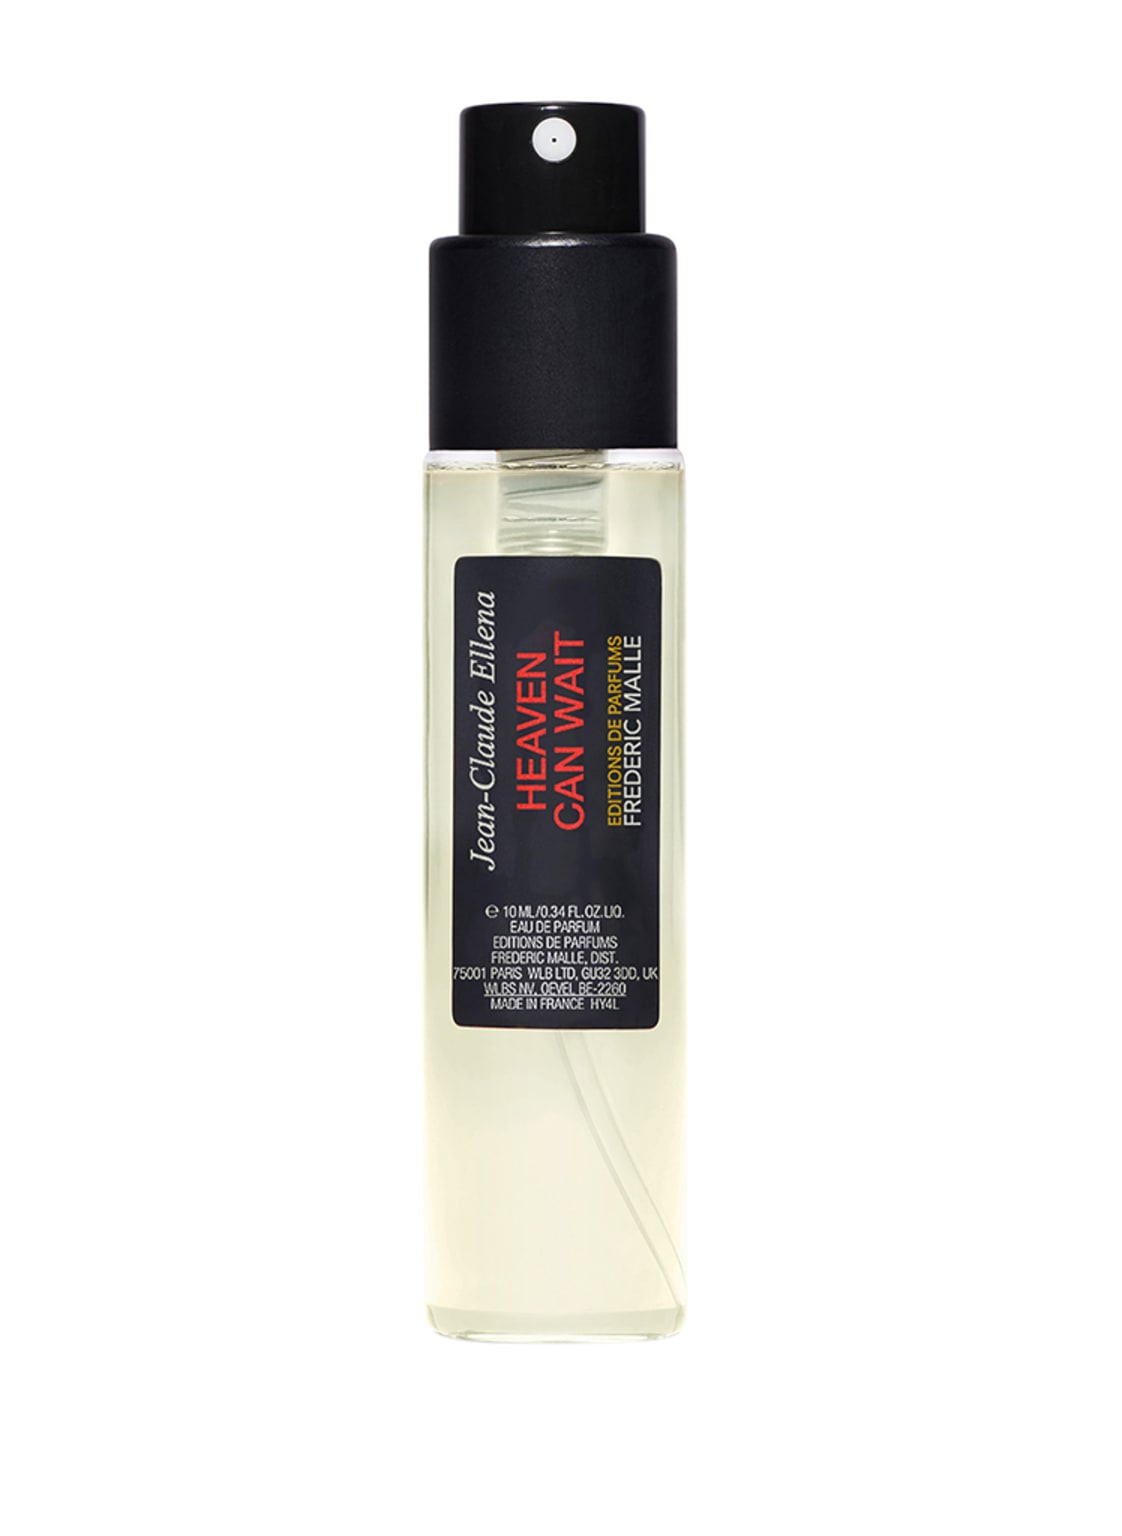 Editions De Parfums Frederic Malle Heaven Can Wait Parfum 10 ml von EDITIONS DE PARFUMS FREDERIC MALLE